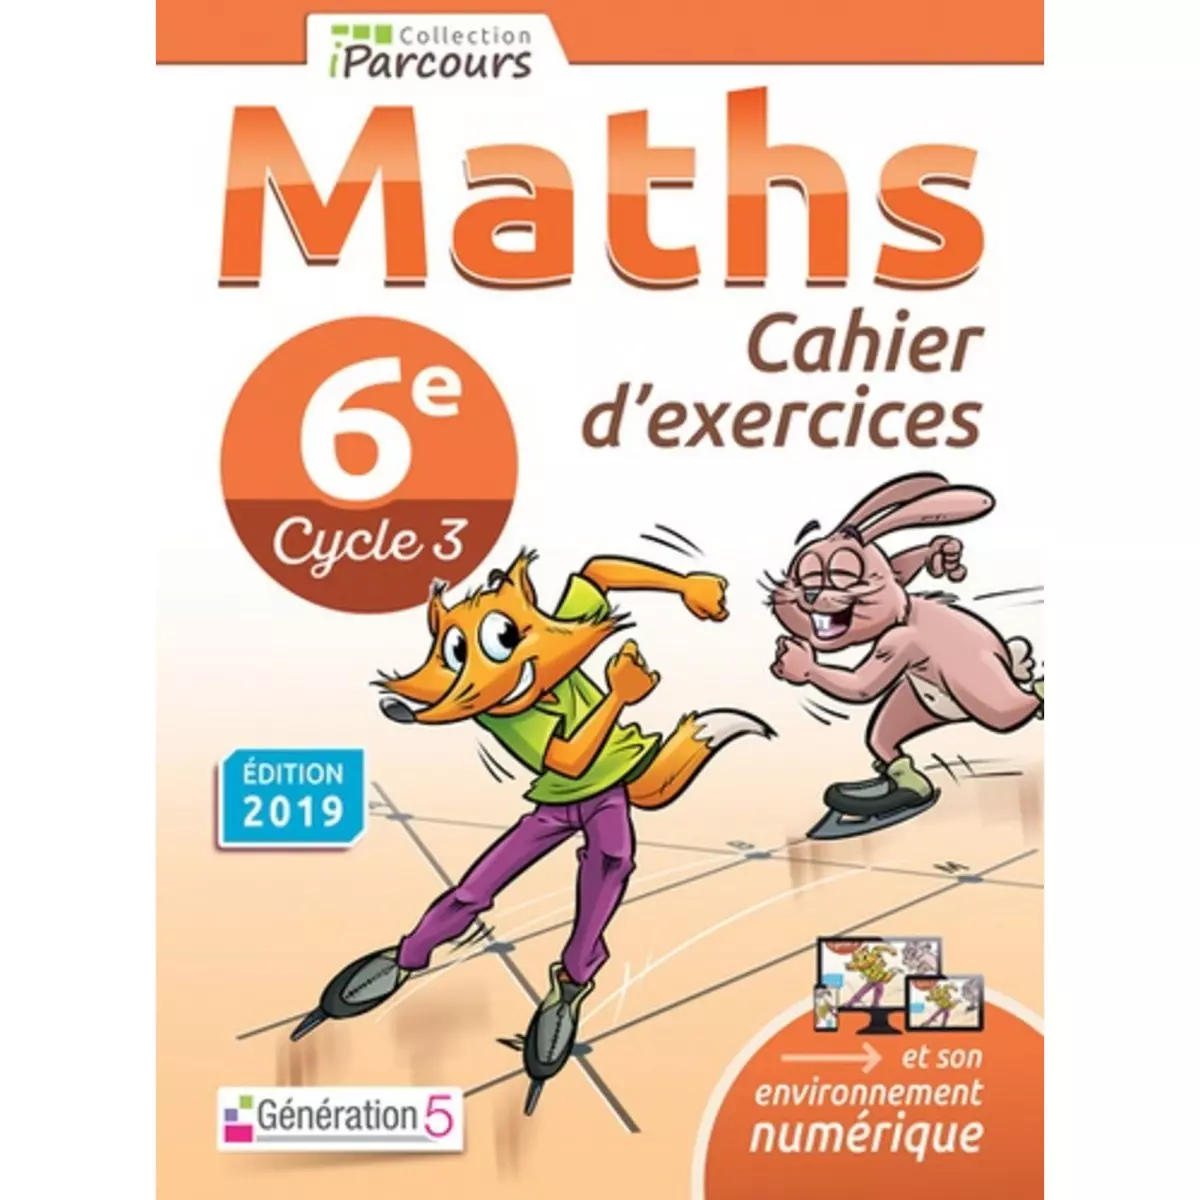  MATHS 6E CYCLE 3 IPARCOURS. CAHIER D'EXERCICES, EDITION 2019, Hache Katia